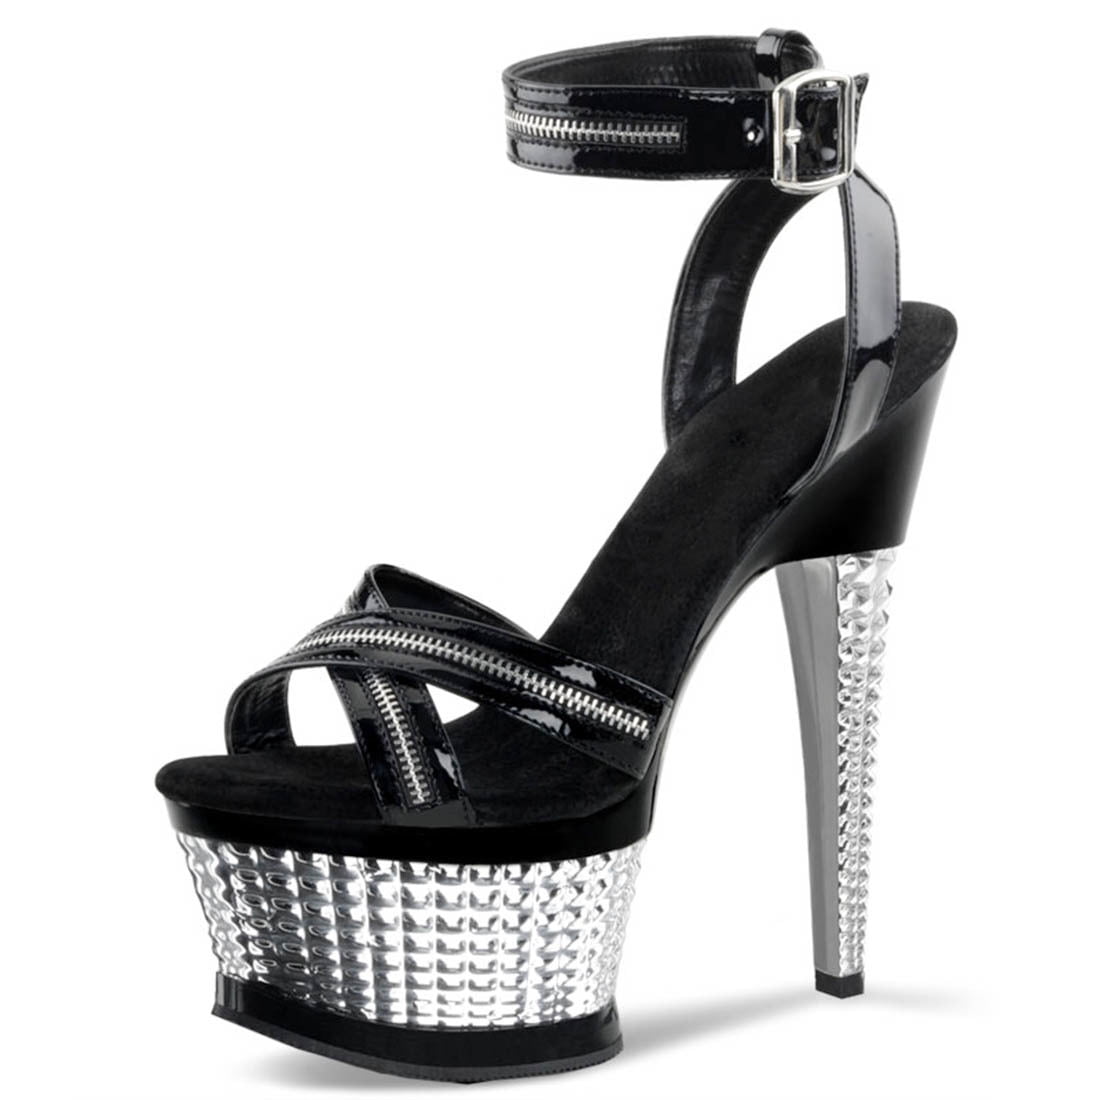 black sandals with silver accents